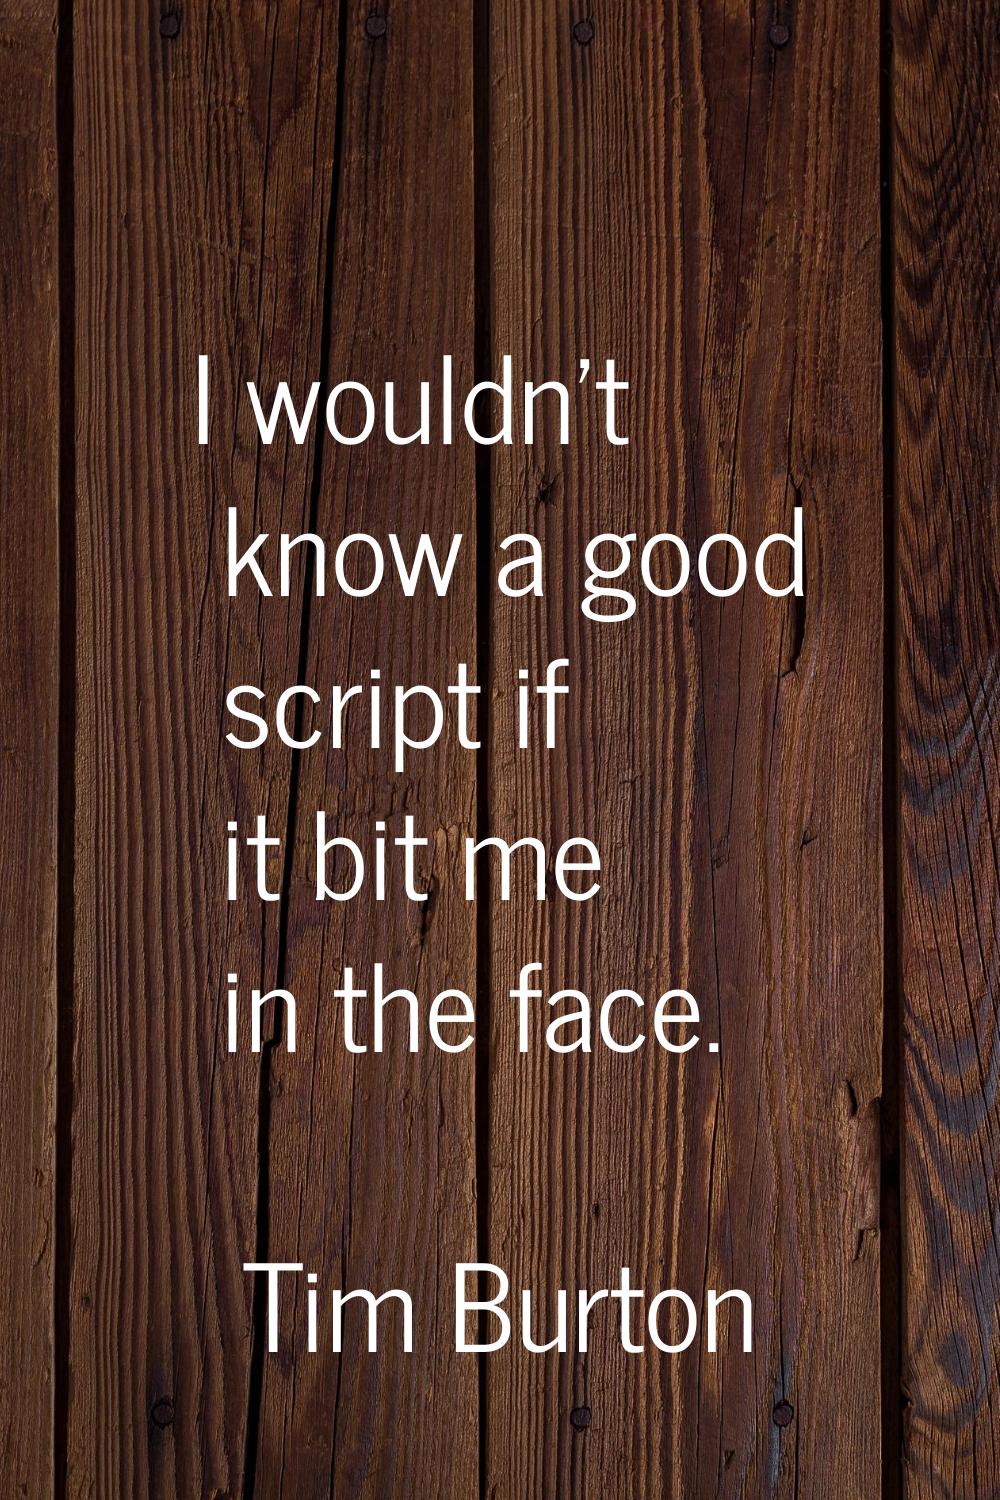 I wouldn't know a good script if it bit me in the face.